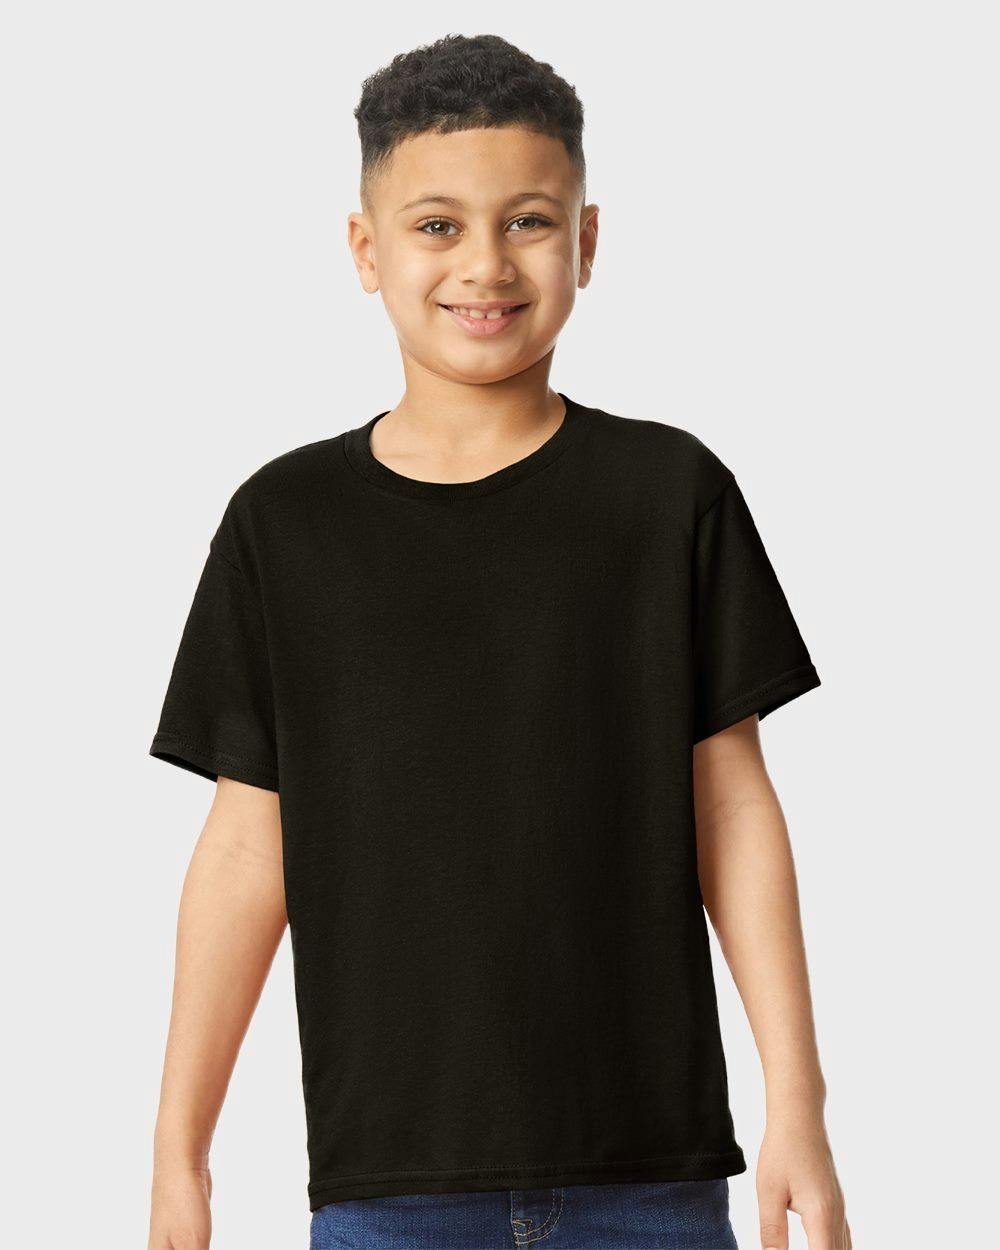 Image for Heavy Cotton™ Youth T-Shirt - 5000B